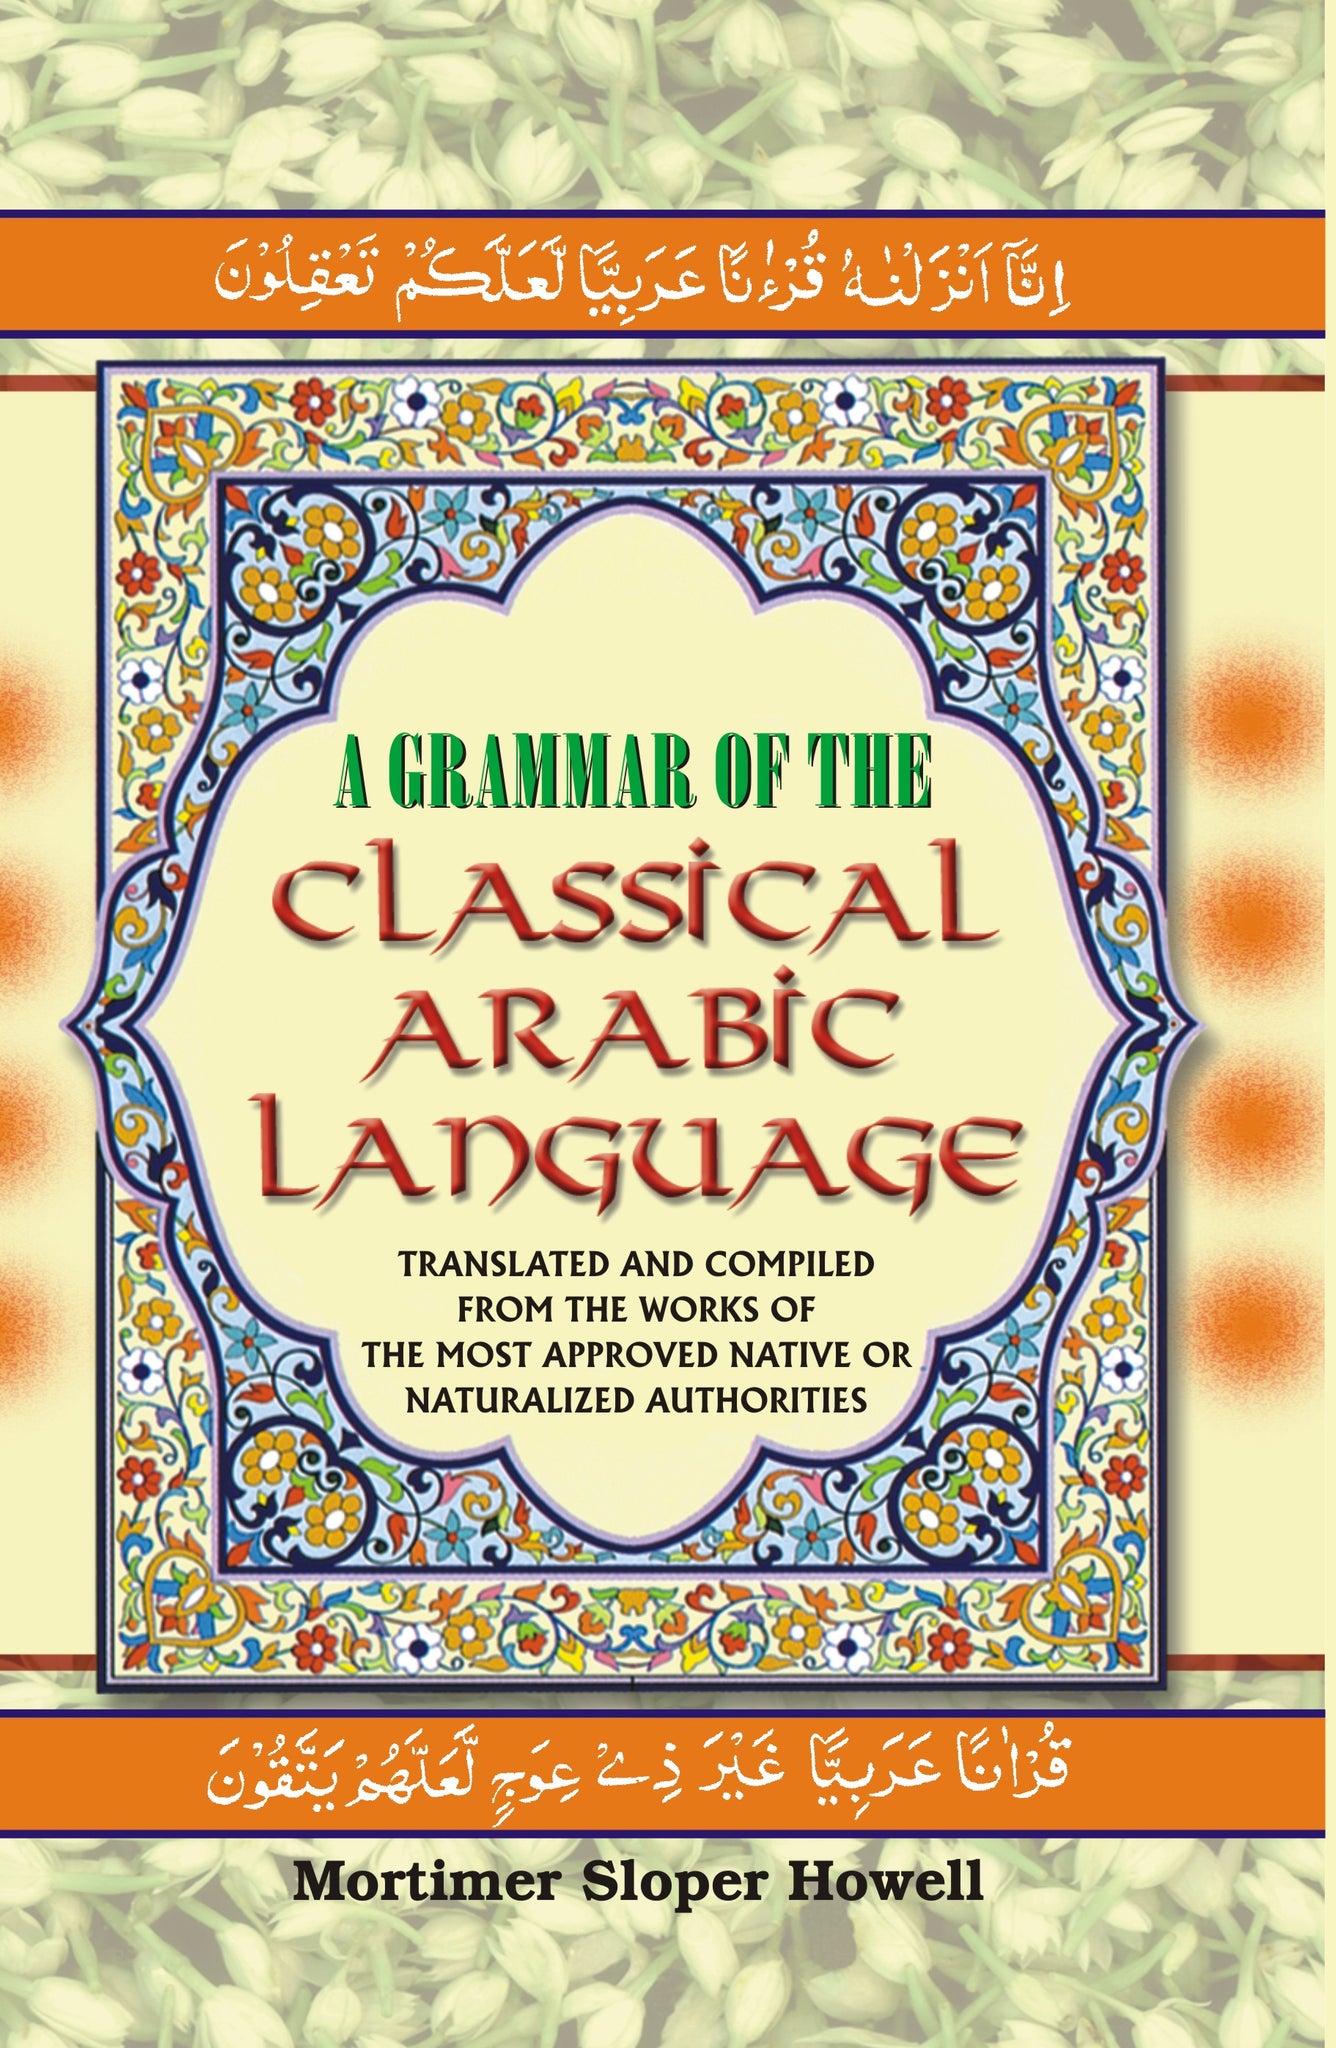 A Grammar of the Classical Arabic Language : Translated and Compiled From the Works of the Most Approved Native Or Naturalized Authorities ( The Verb and The Particle ) Volume Vol. 5th [Hardcover]